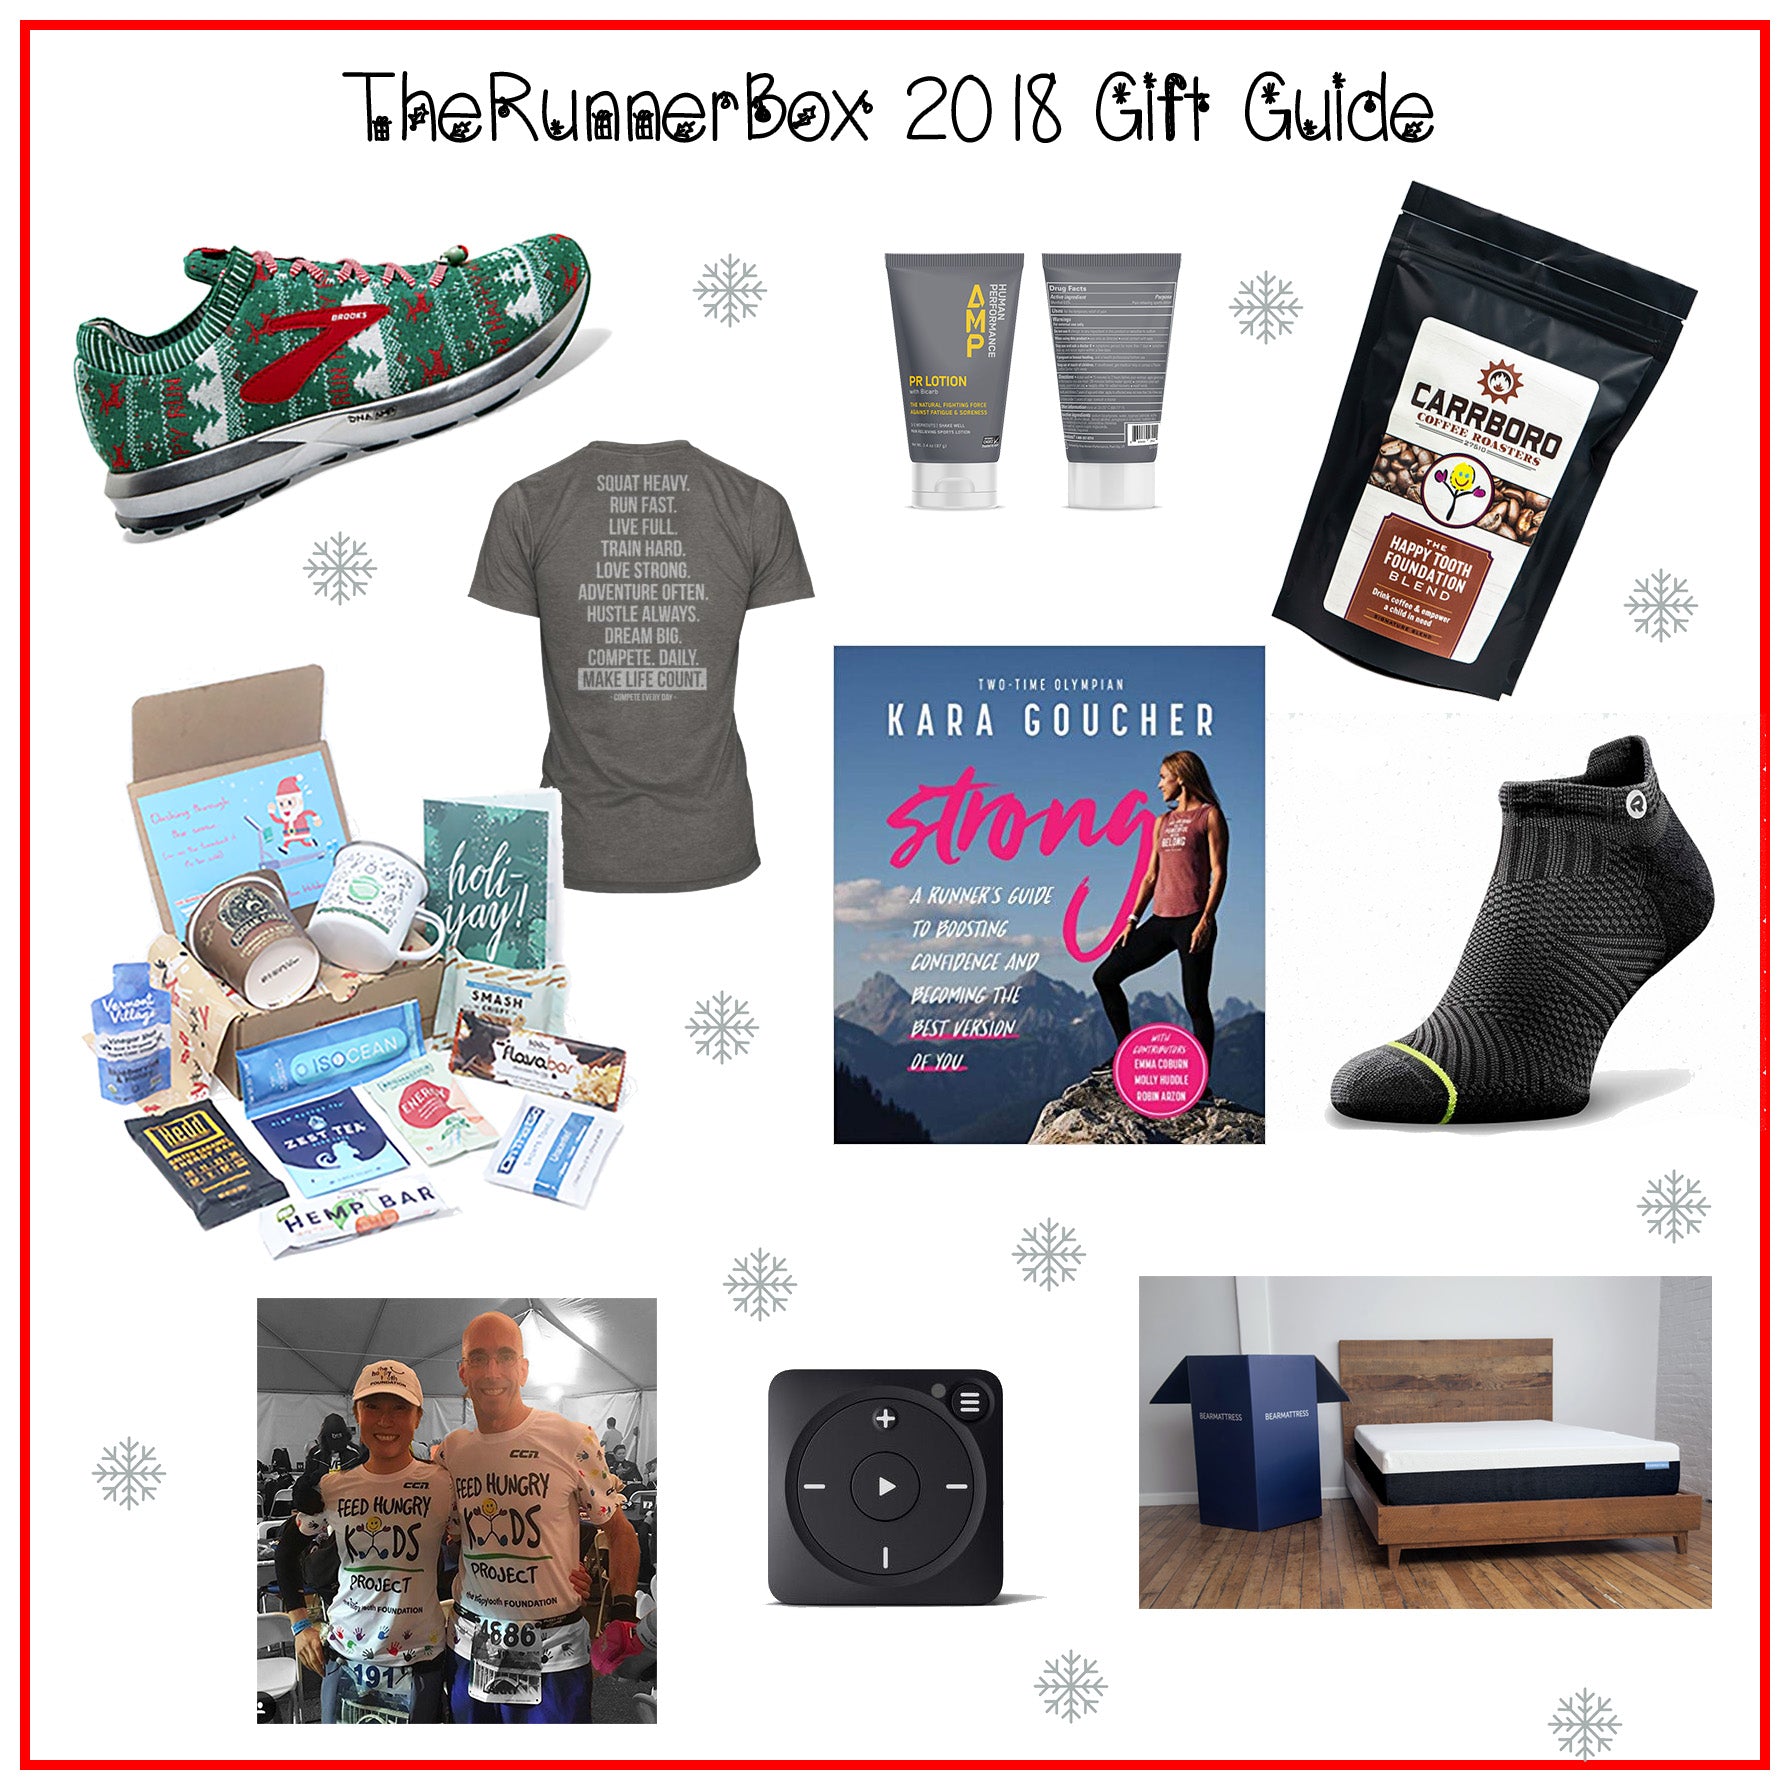 The RunnerBox 2018 Holiday Gift Guide